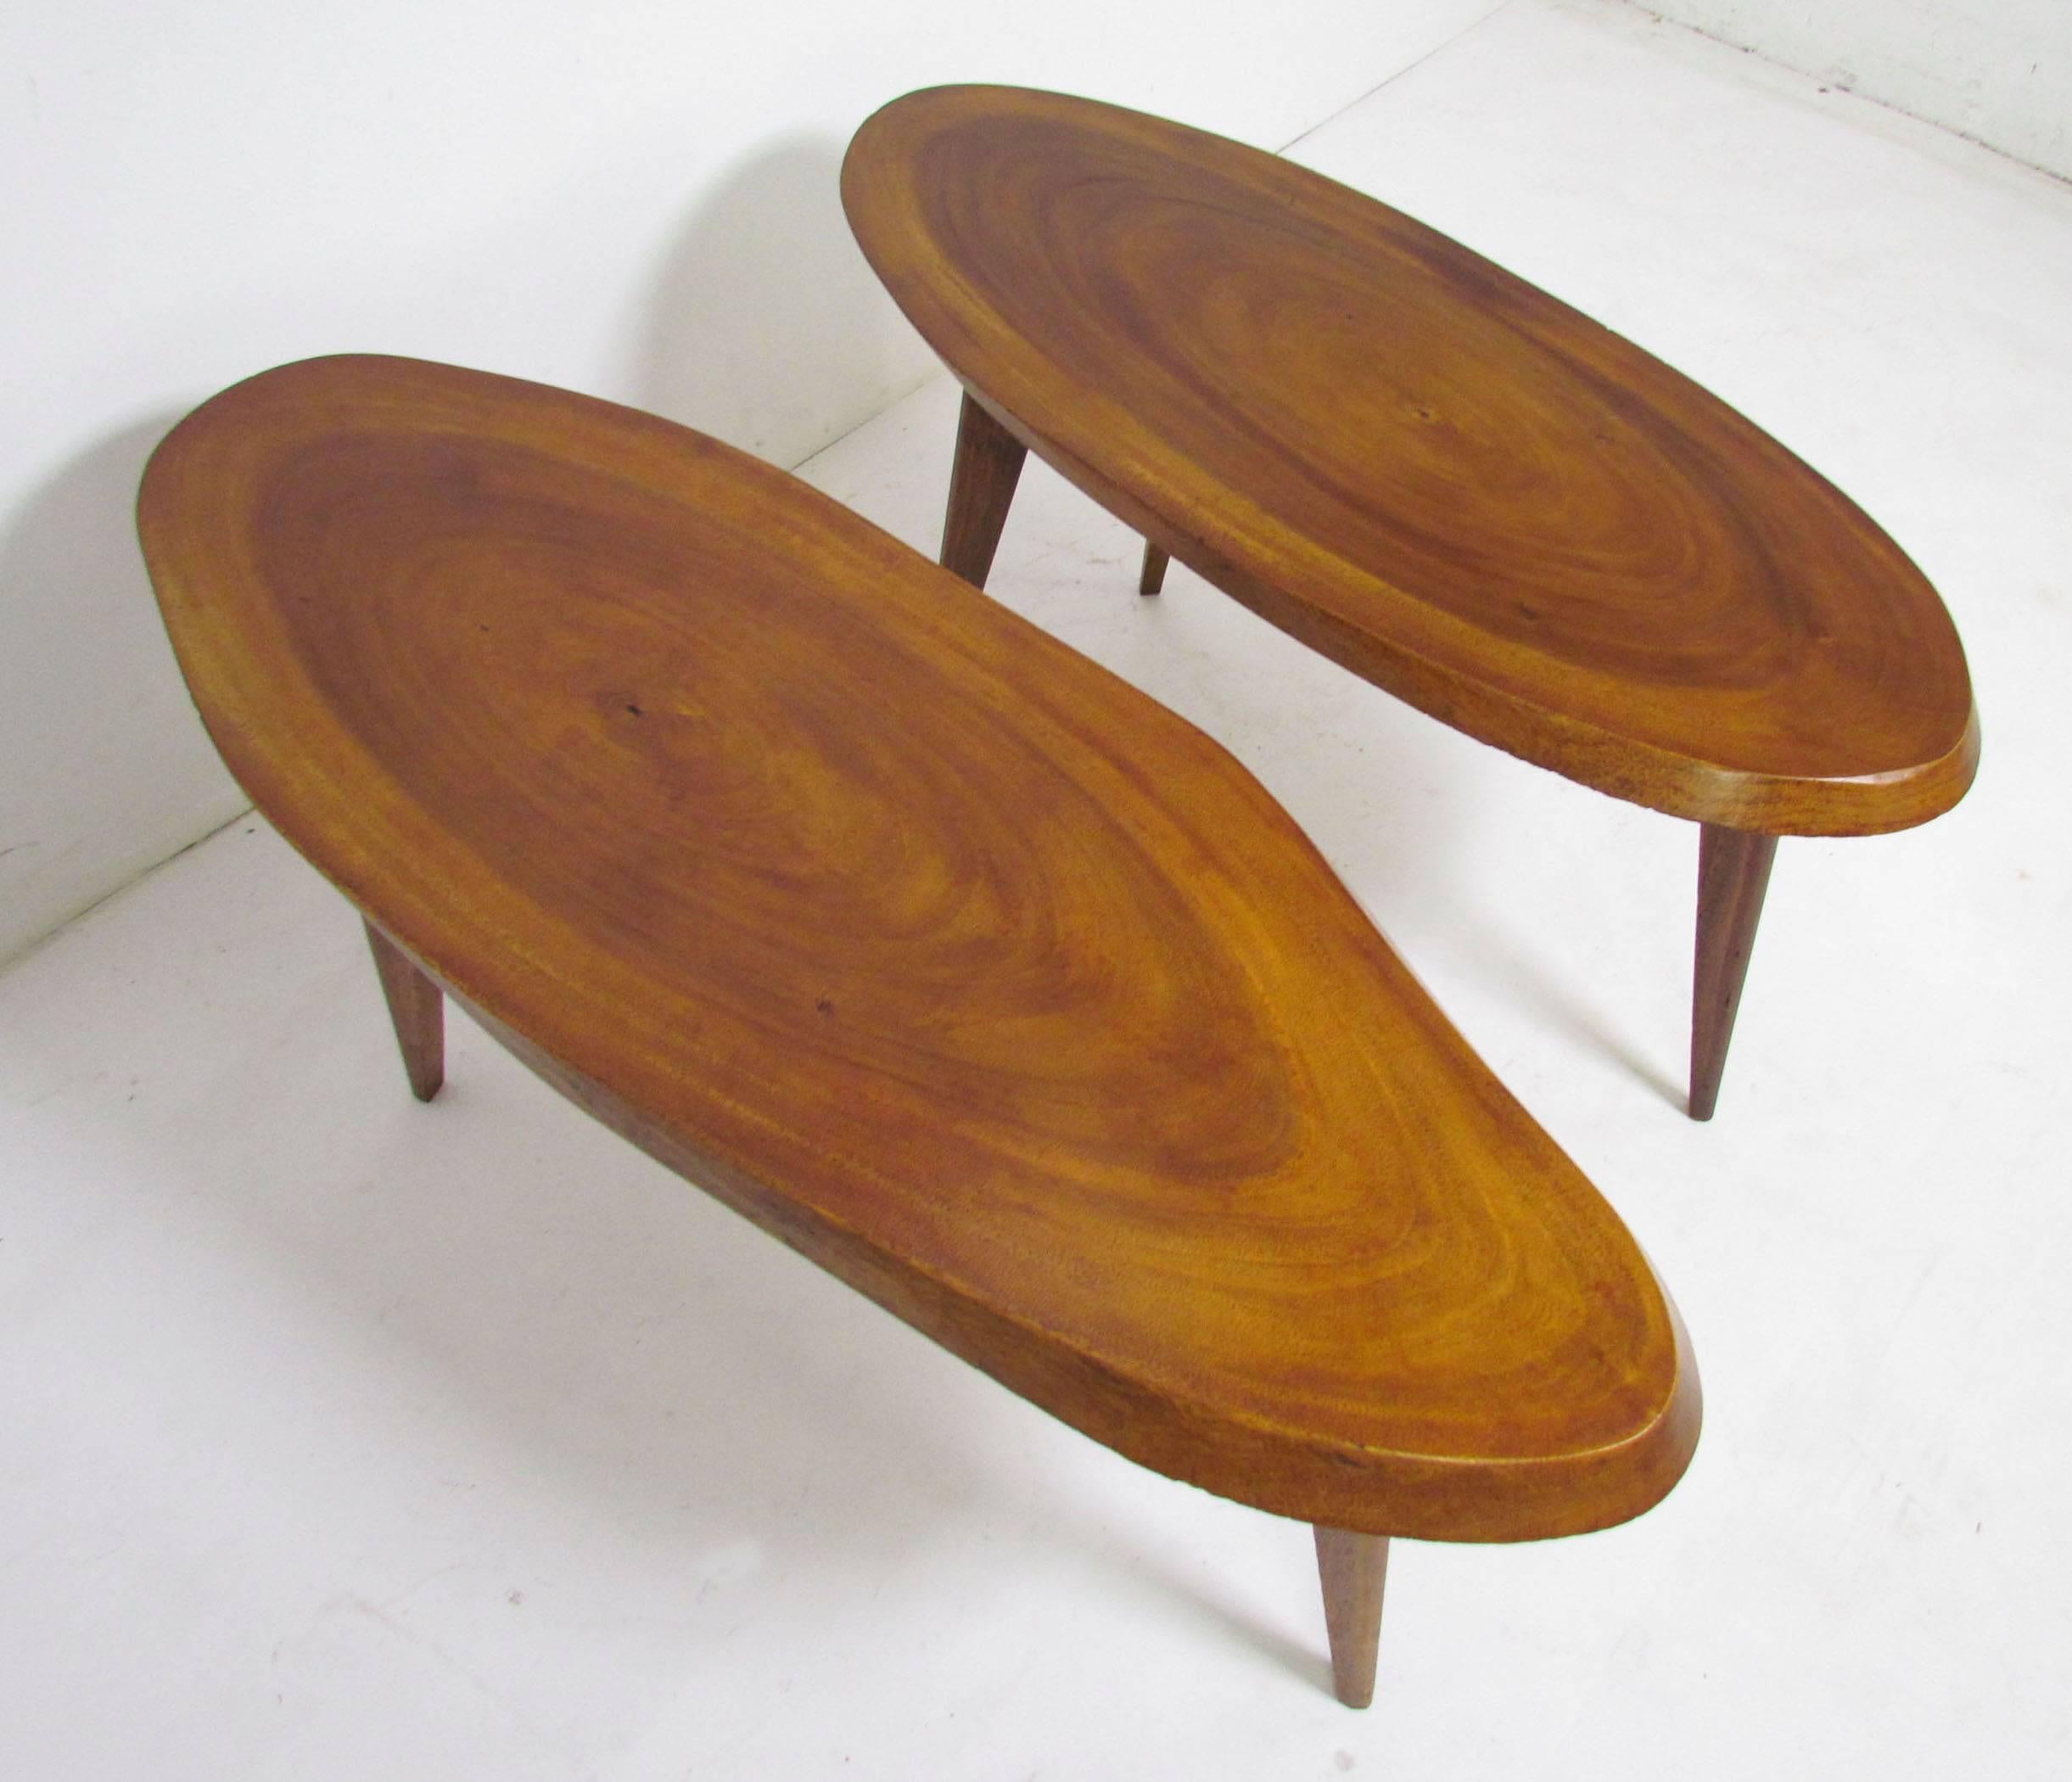 Pair of Mid-Century studio made free-form live edge tables on tripod legs. These function well as side or end tables but could also serve as small coffee or cocktail tables. 

Unknown maker, style reminiscent of George Nakashima.

One measures